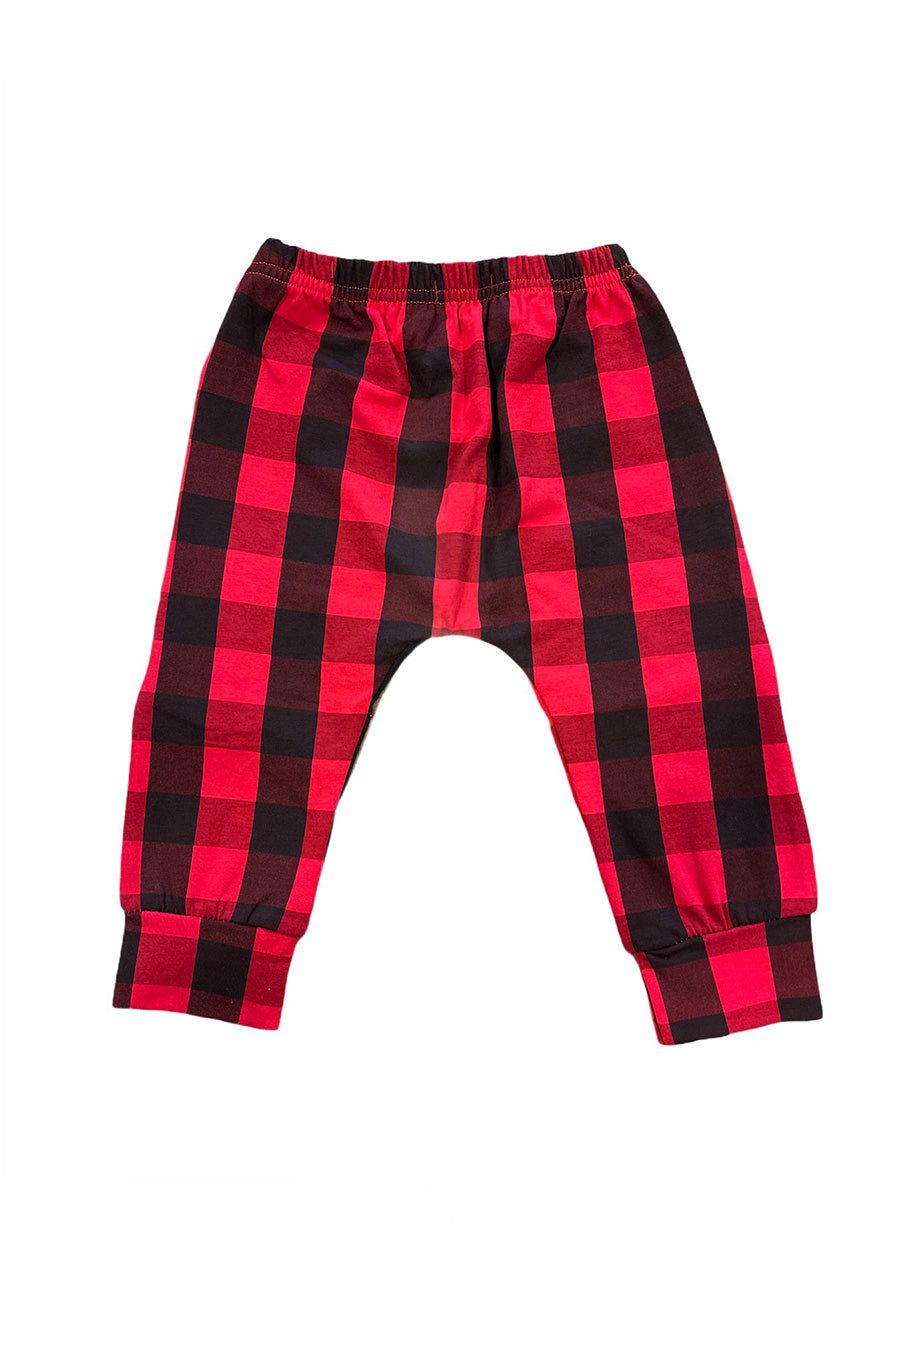 Checkered Kids Jogger | Red/Black - Main Image Number 2 of 2